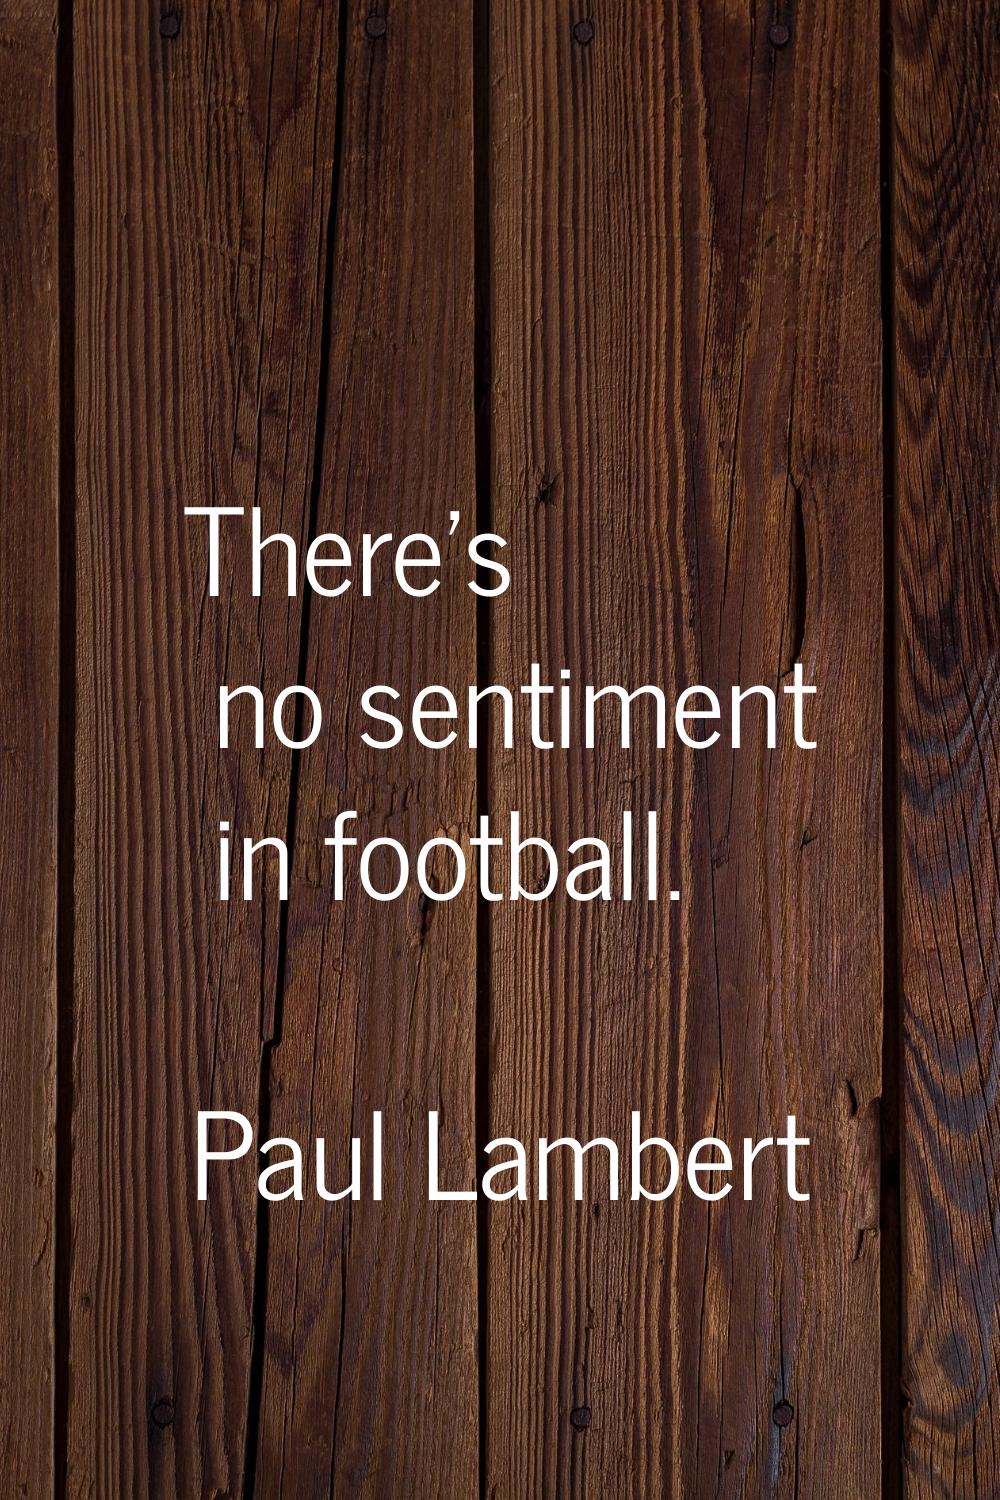 There's no sentiment in football.